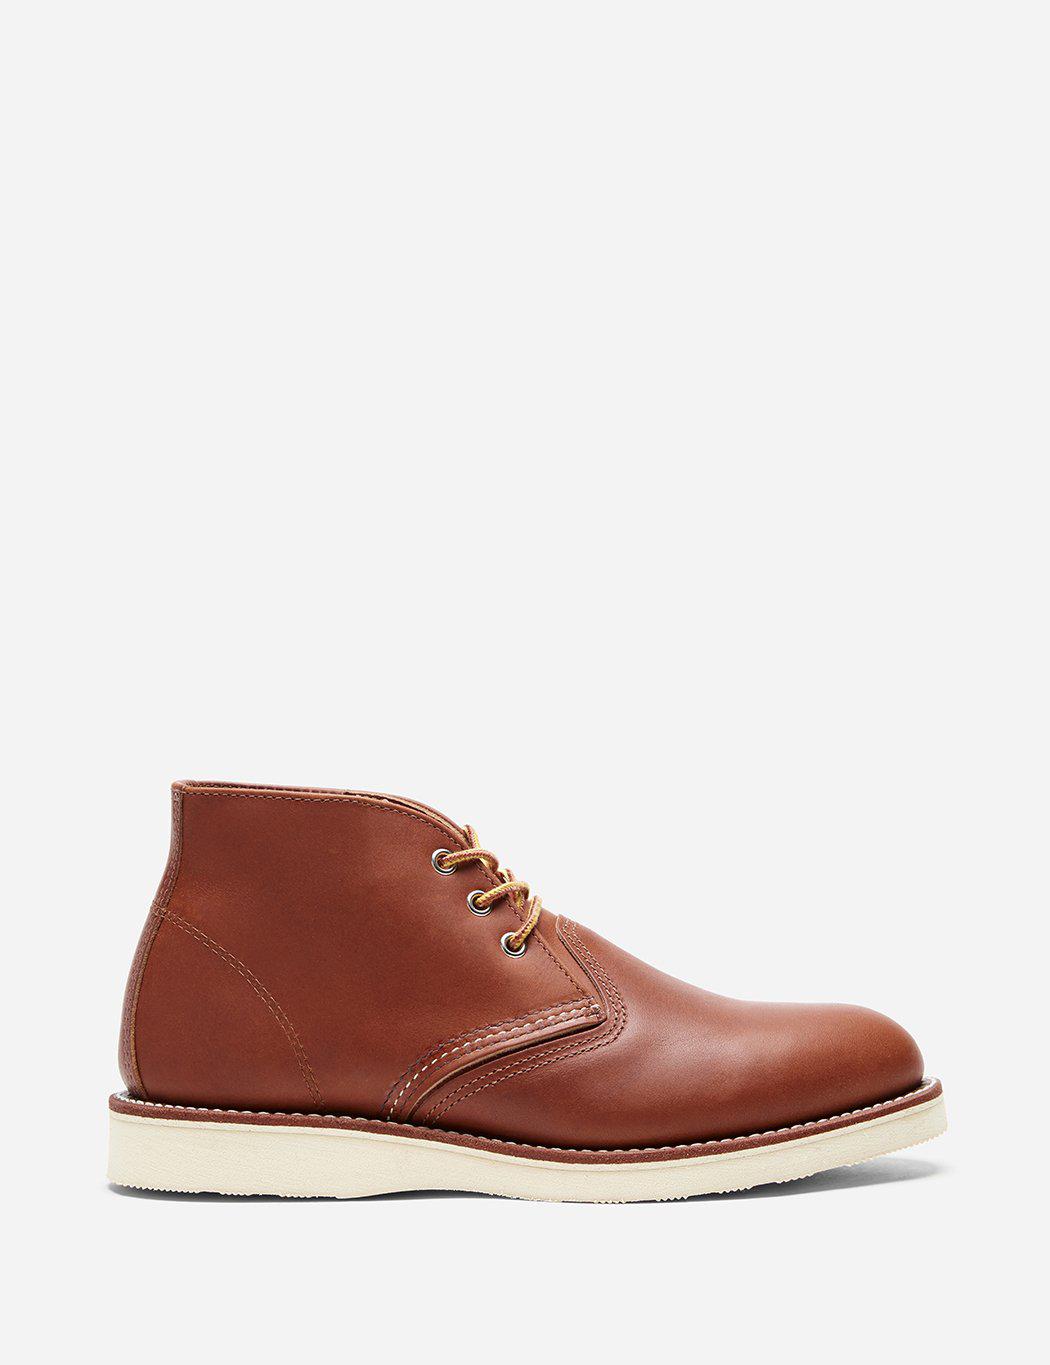 Red Wing Chukka Boot 3140 (leather) in Tan (Brown) for Men - Lyst